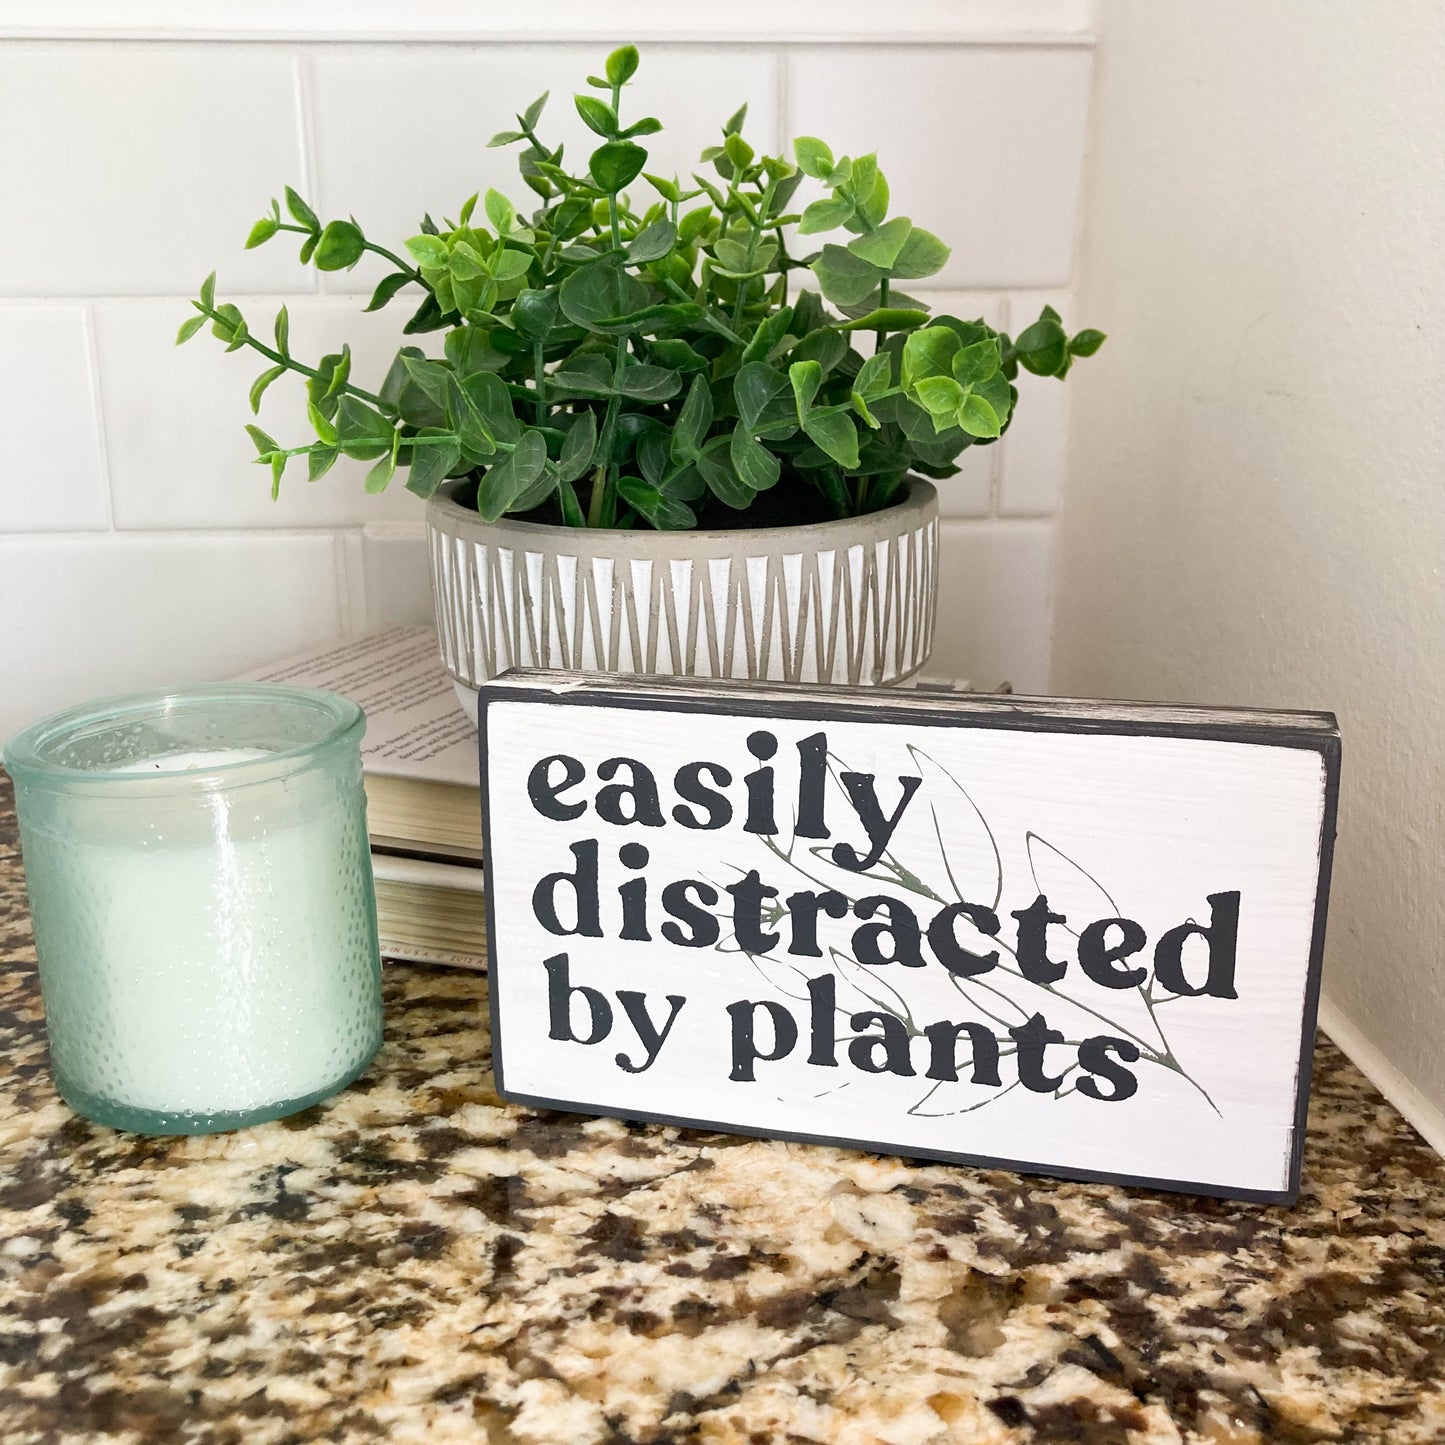 Easily distrated by plants wood sign painted white with black wording and leaf 3.5 inches by 6 inches